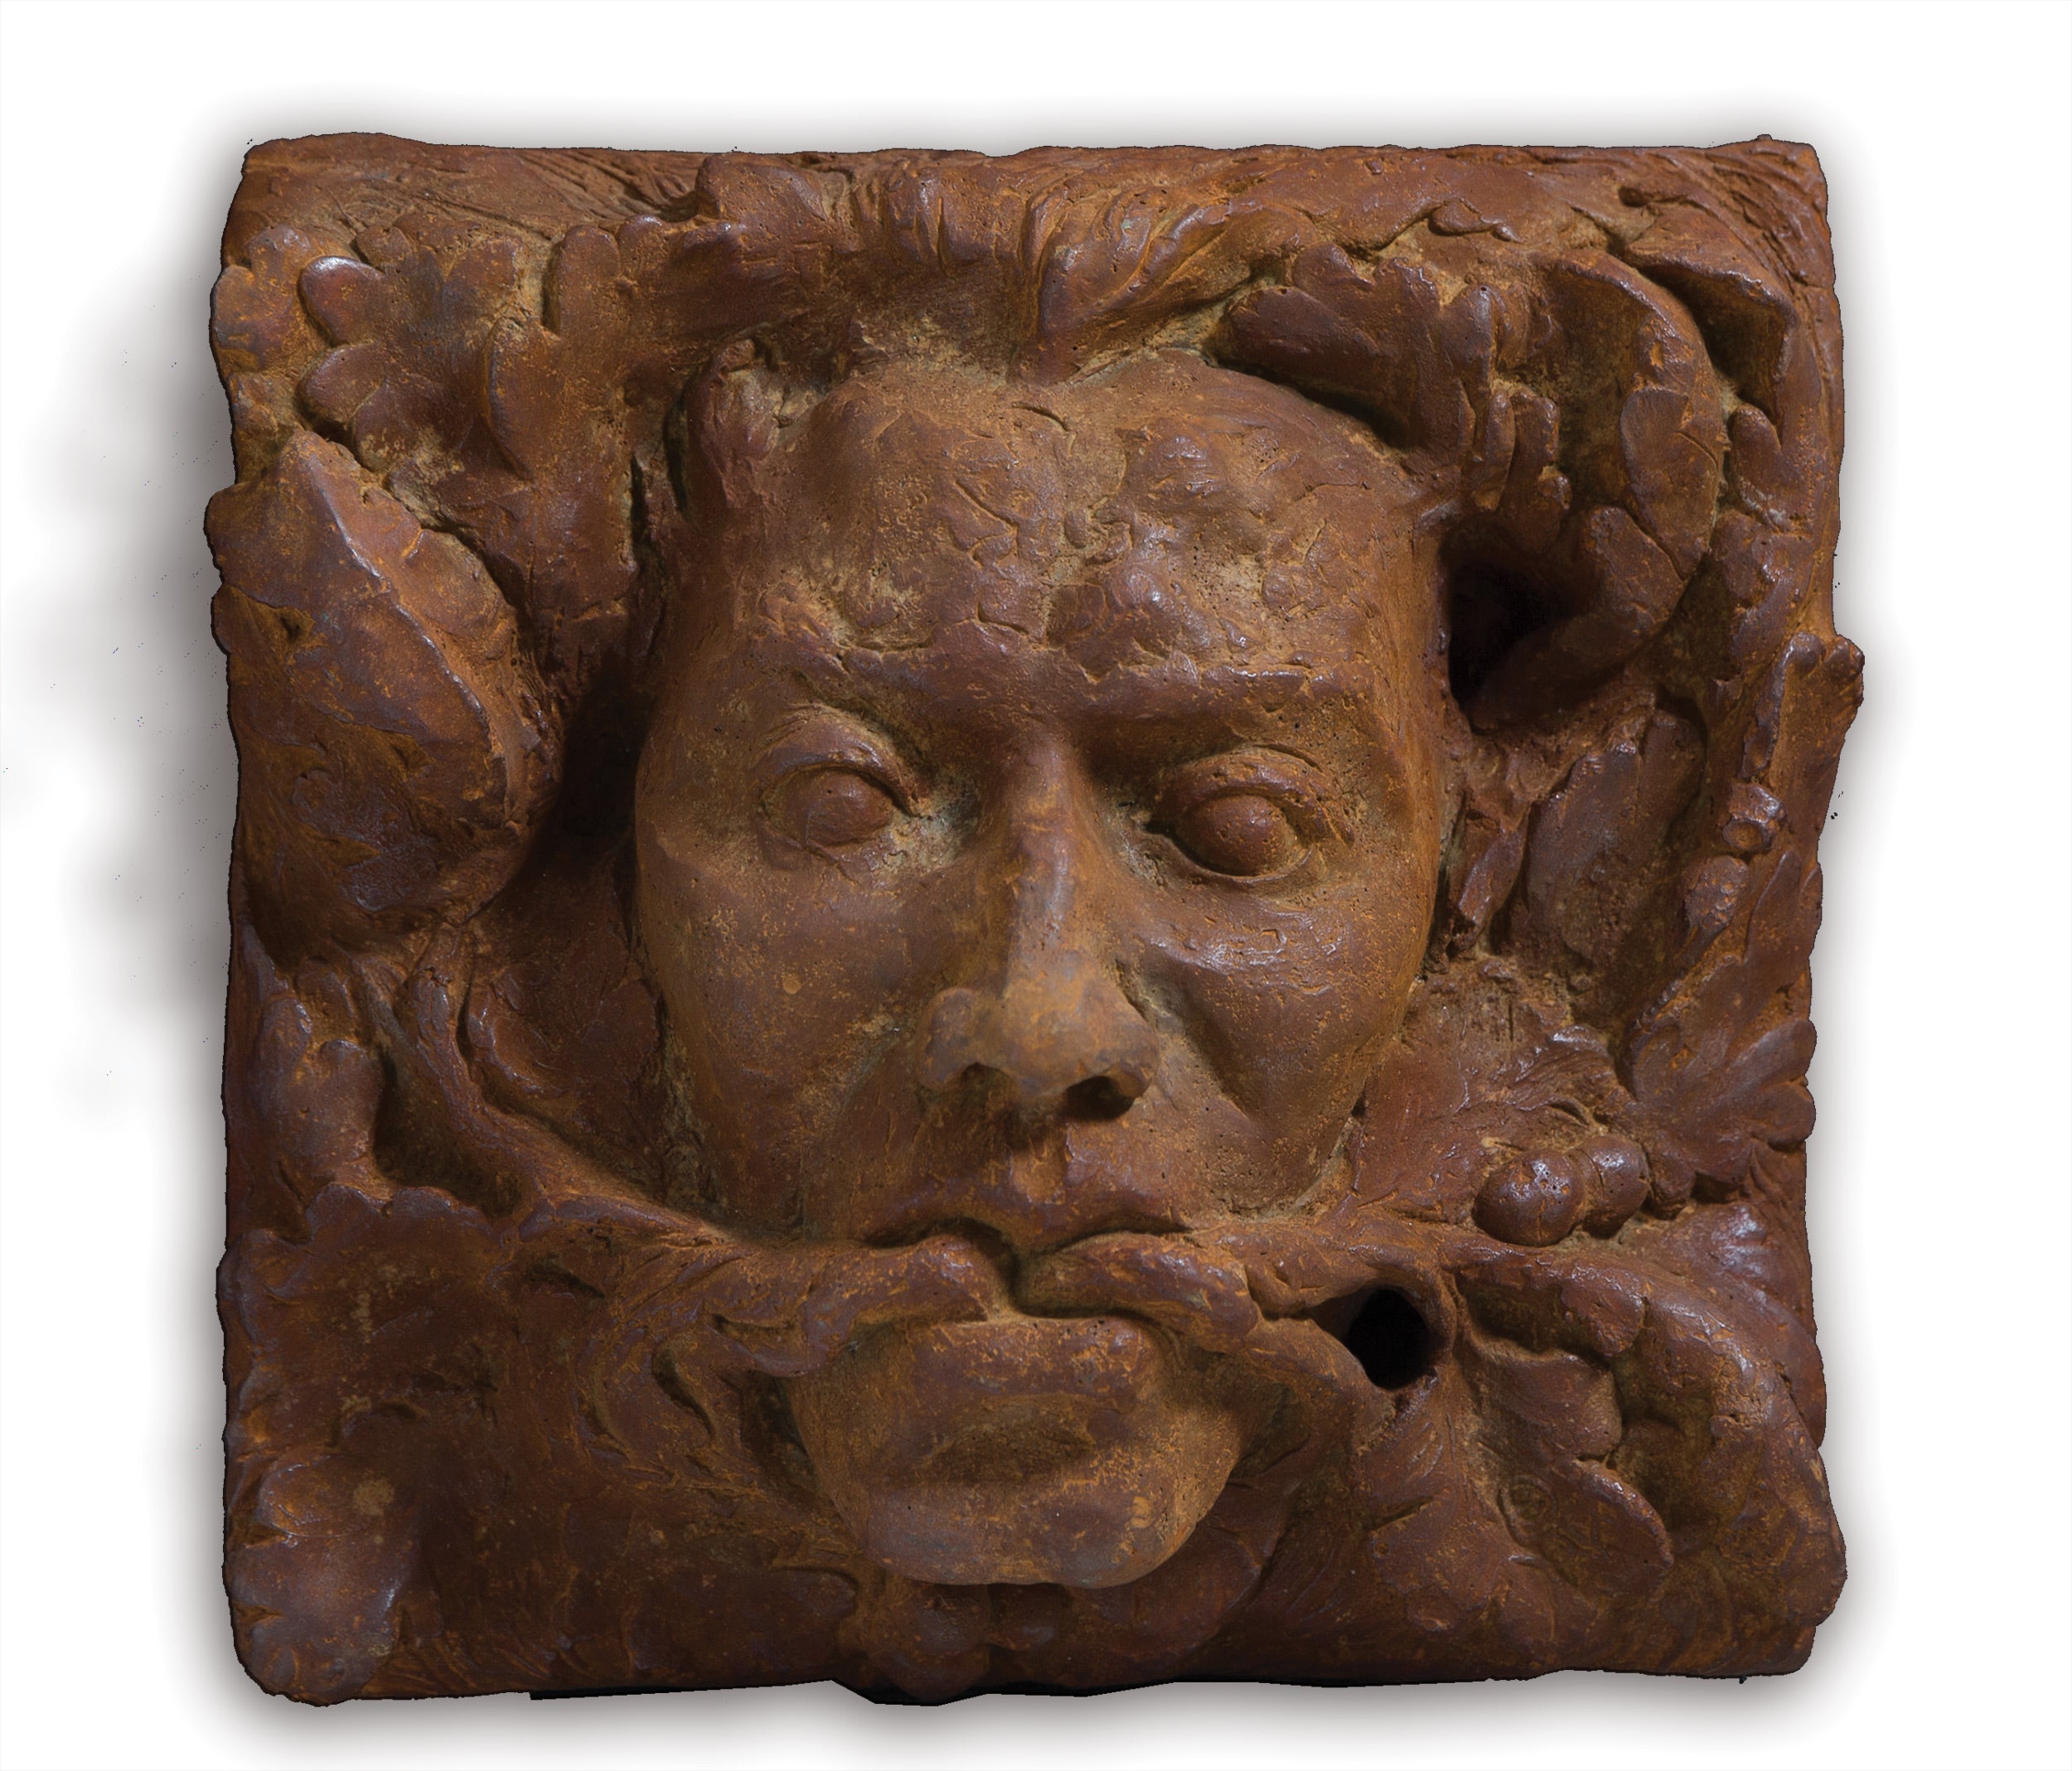 Olive Wootton, The Green Man, resin bonded iron, edition 9